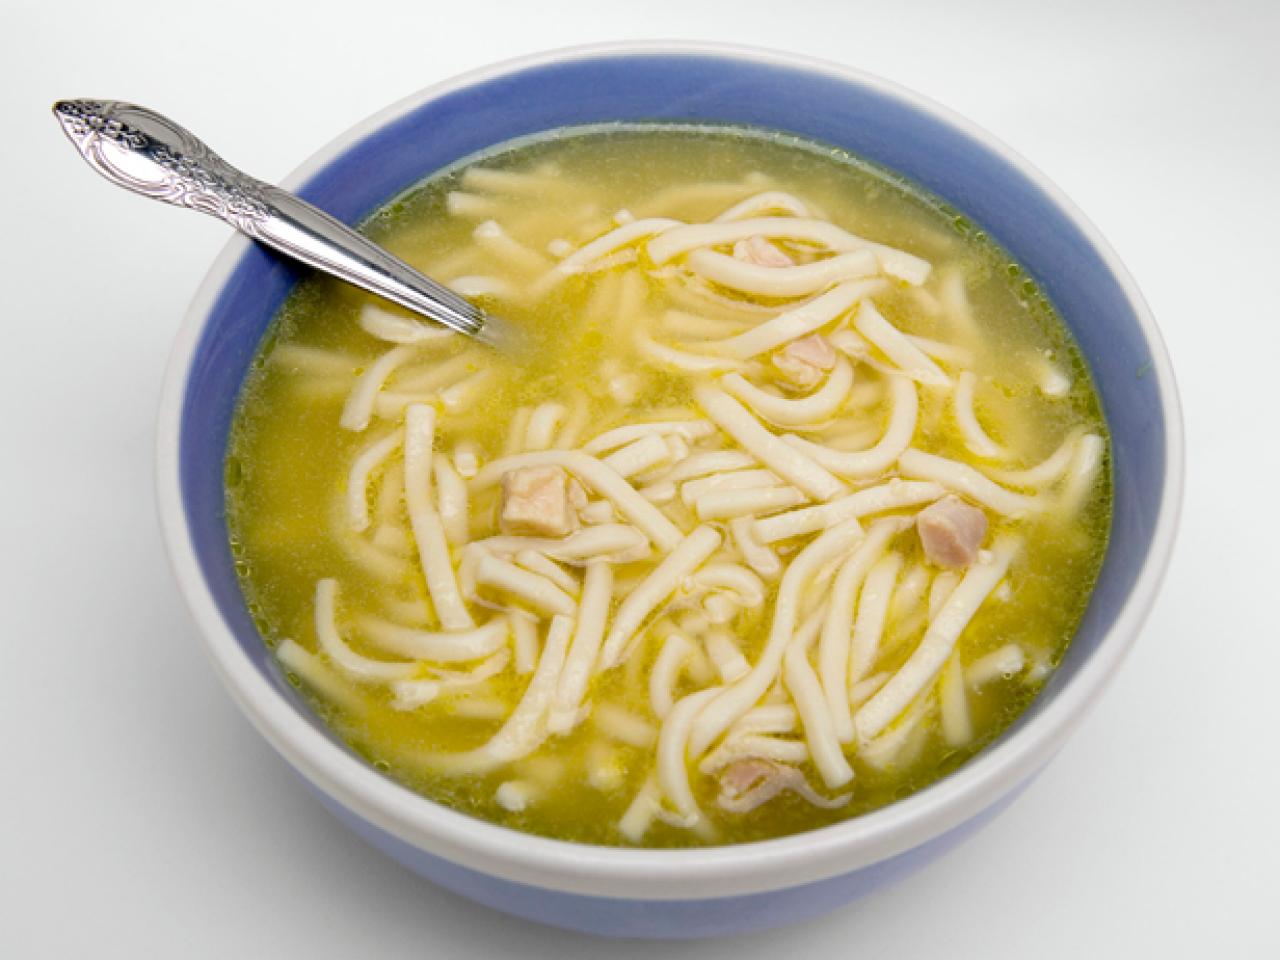 Health Valley Organic Chicken Noodle Soup